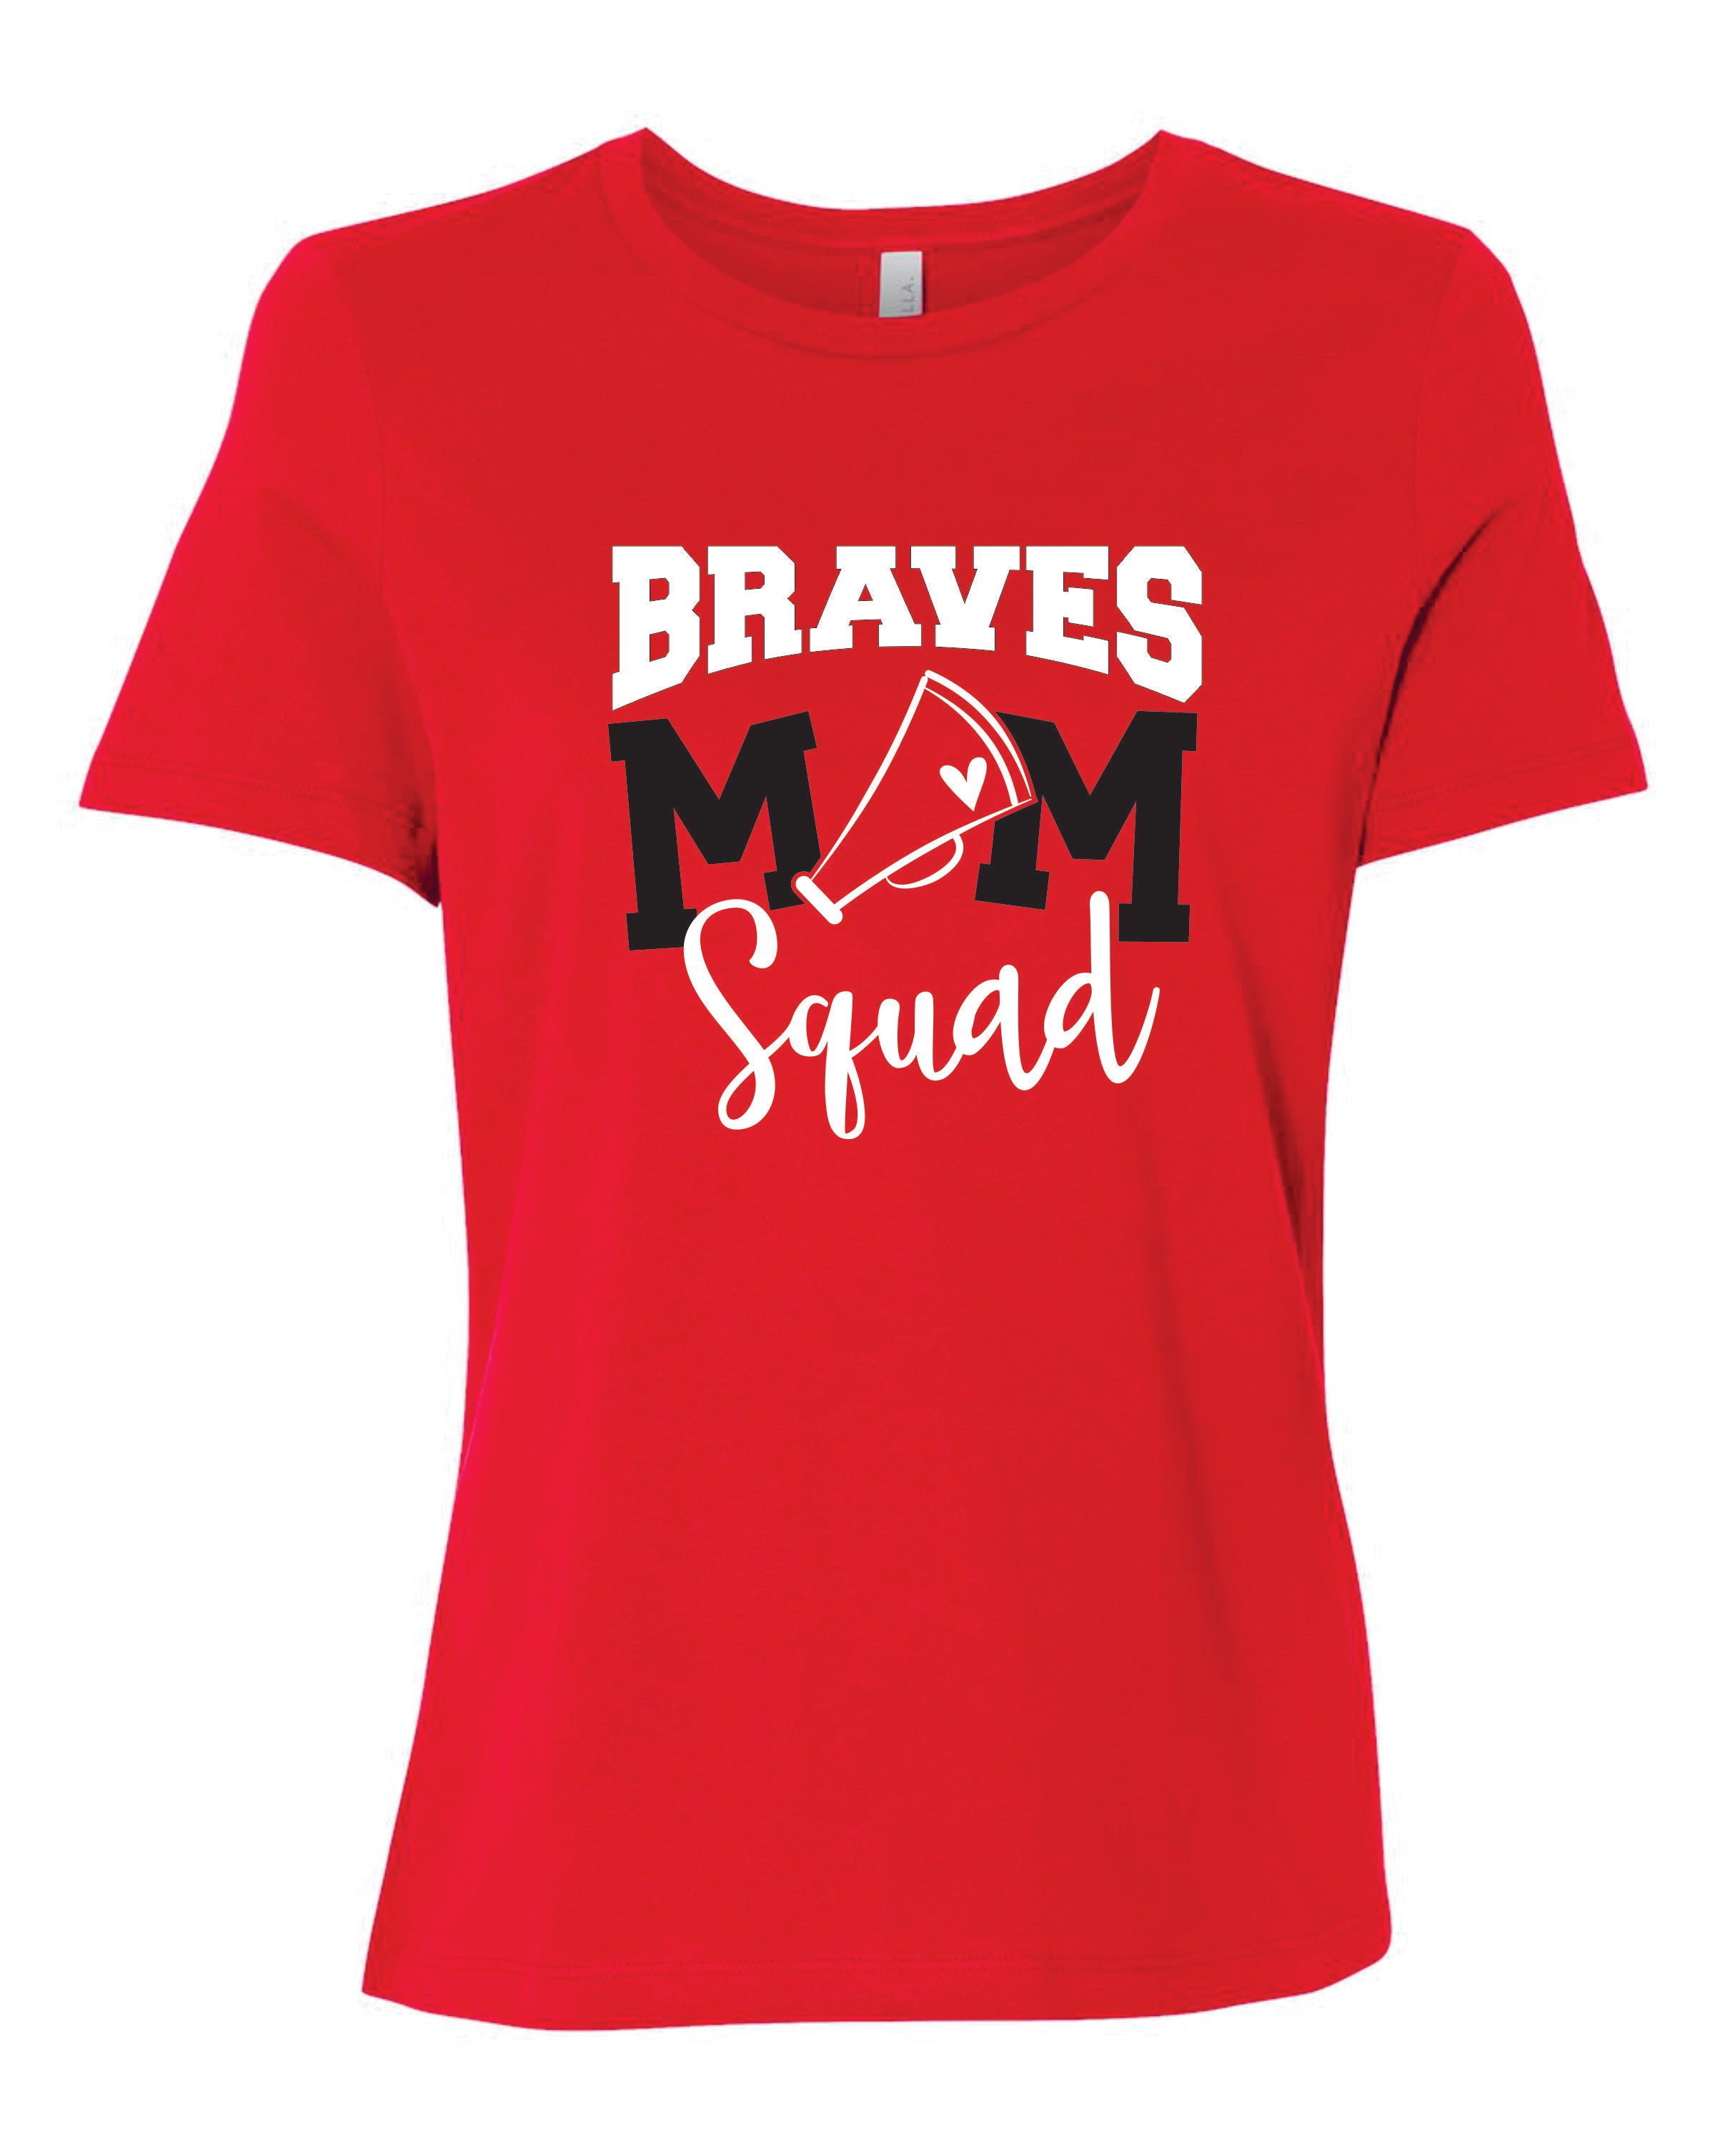 Mechanicsville Braves Women's Bella and Canvas Short Sleeve Relaxed Fit Round Neck-CHEER MOM SQUAD